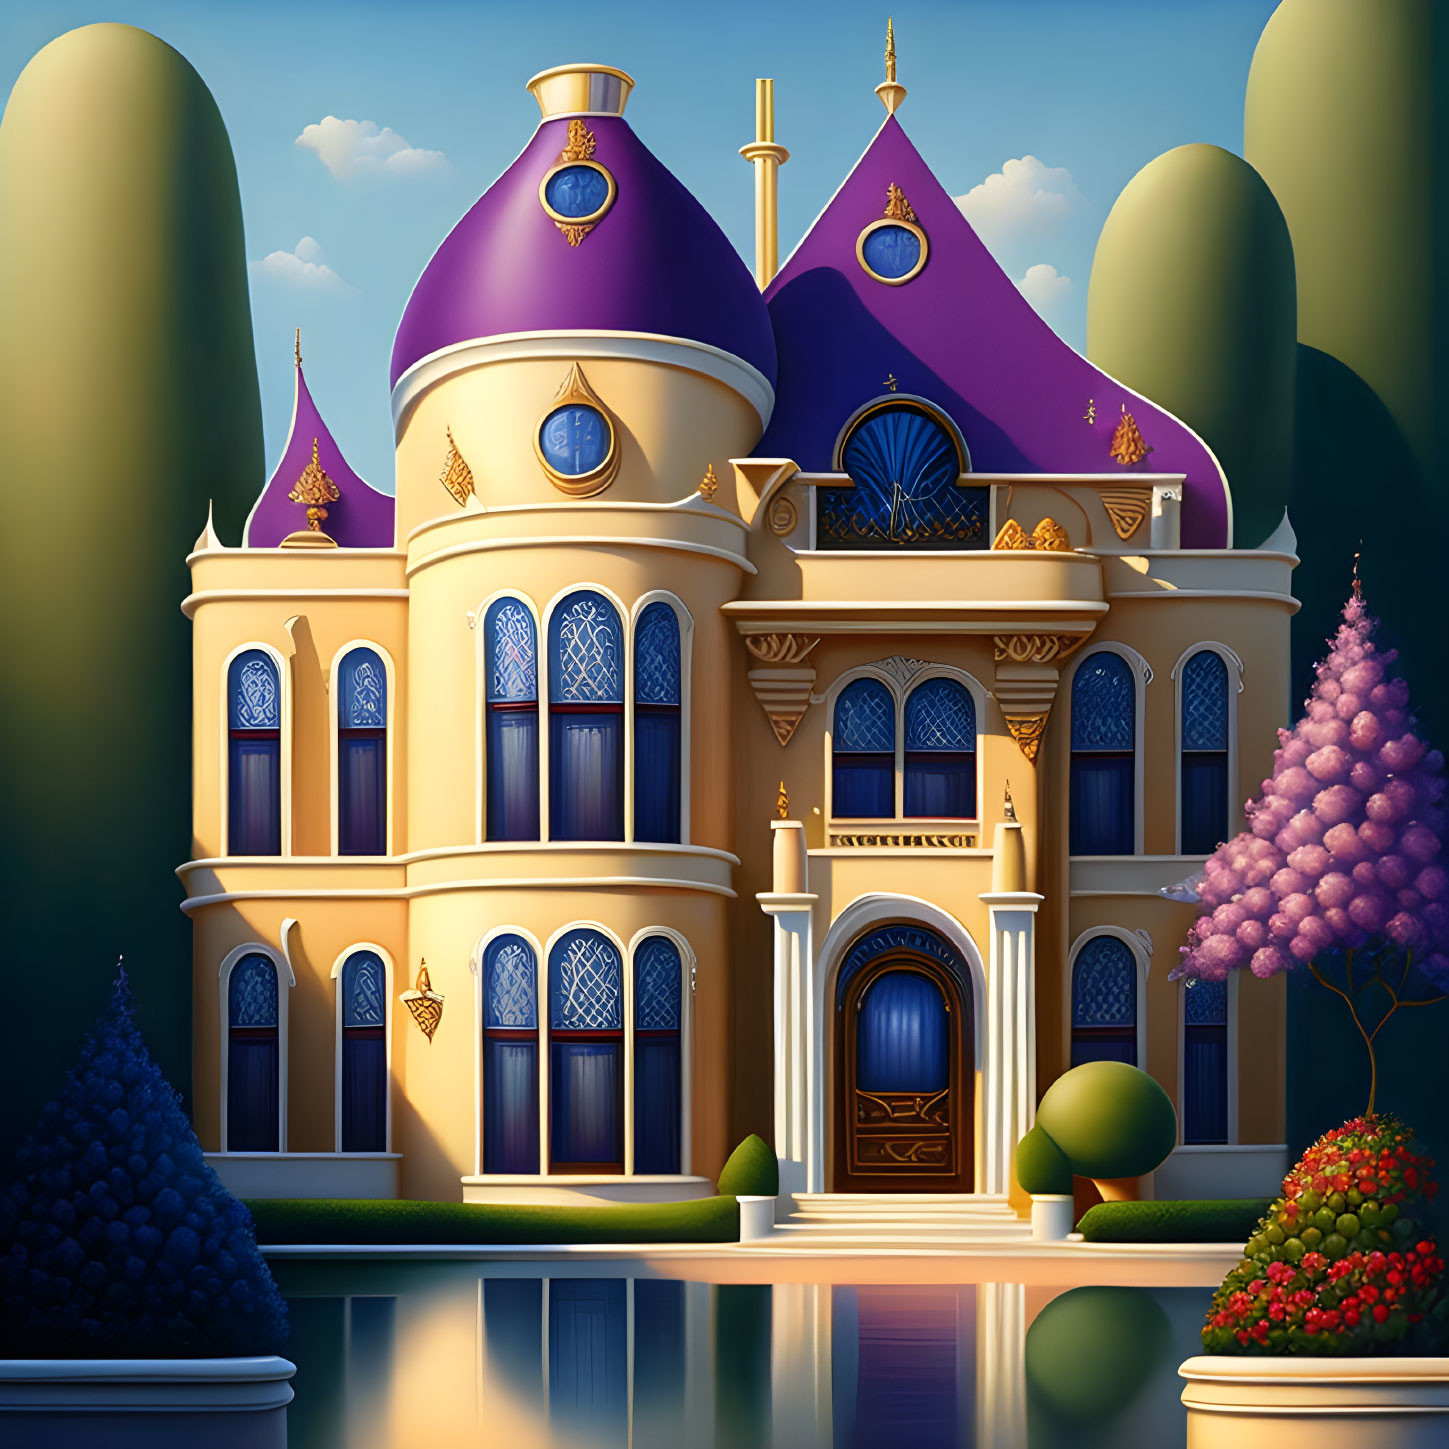 Whimsical fairytale mansion with purple domes and golden accents